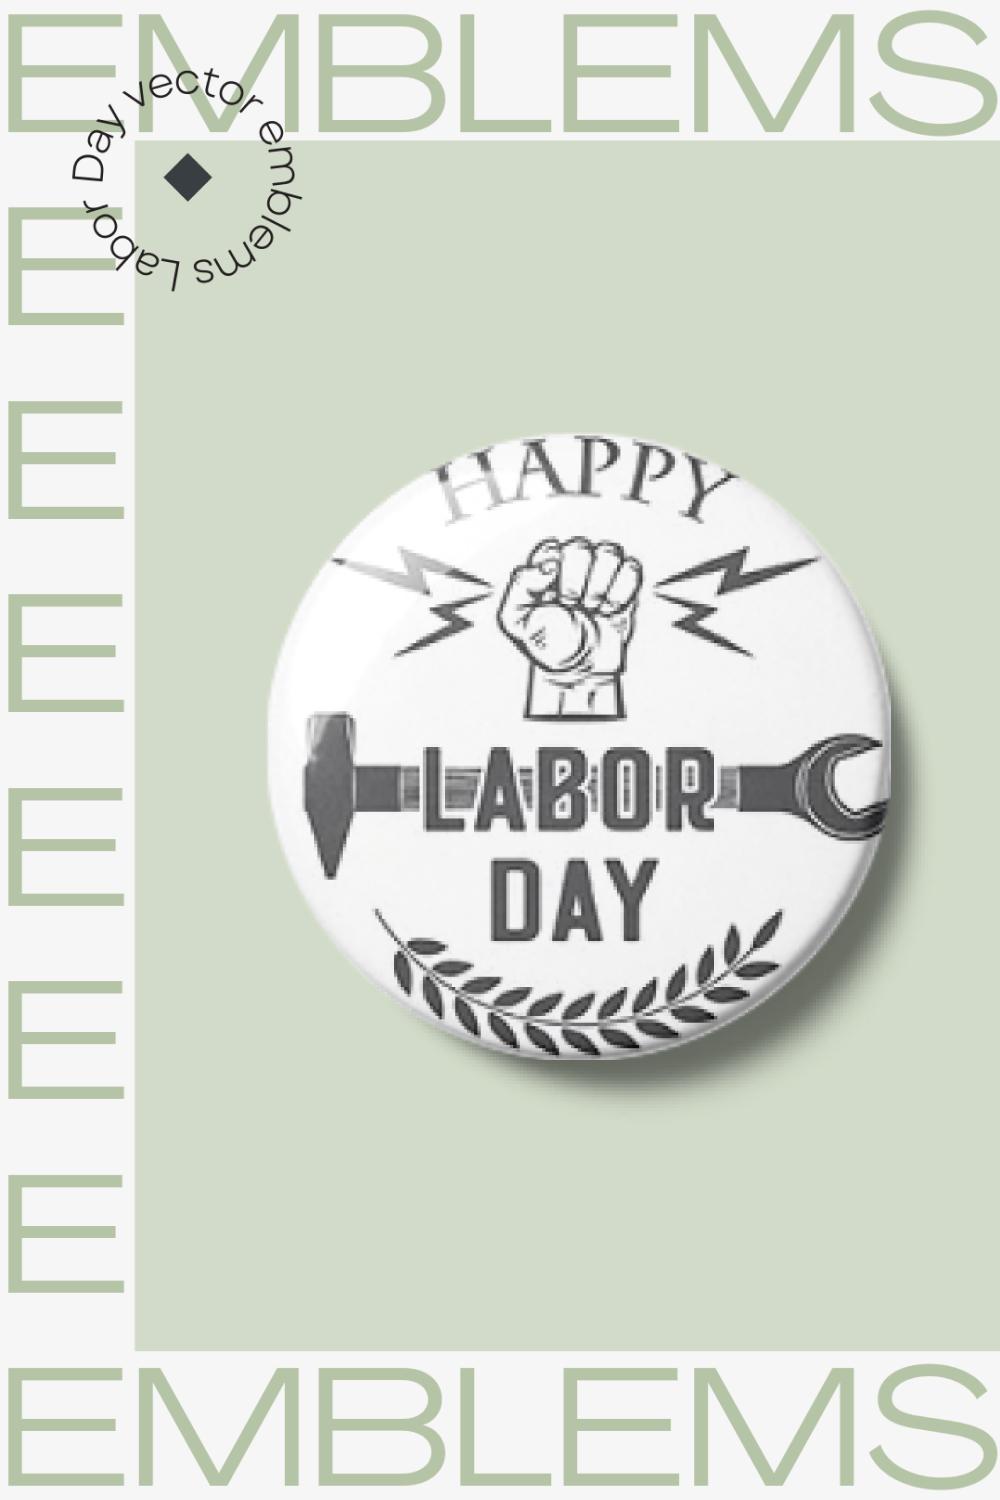 Pinterest images of labor day vector emblems.